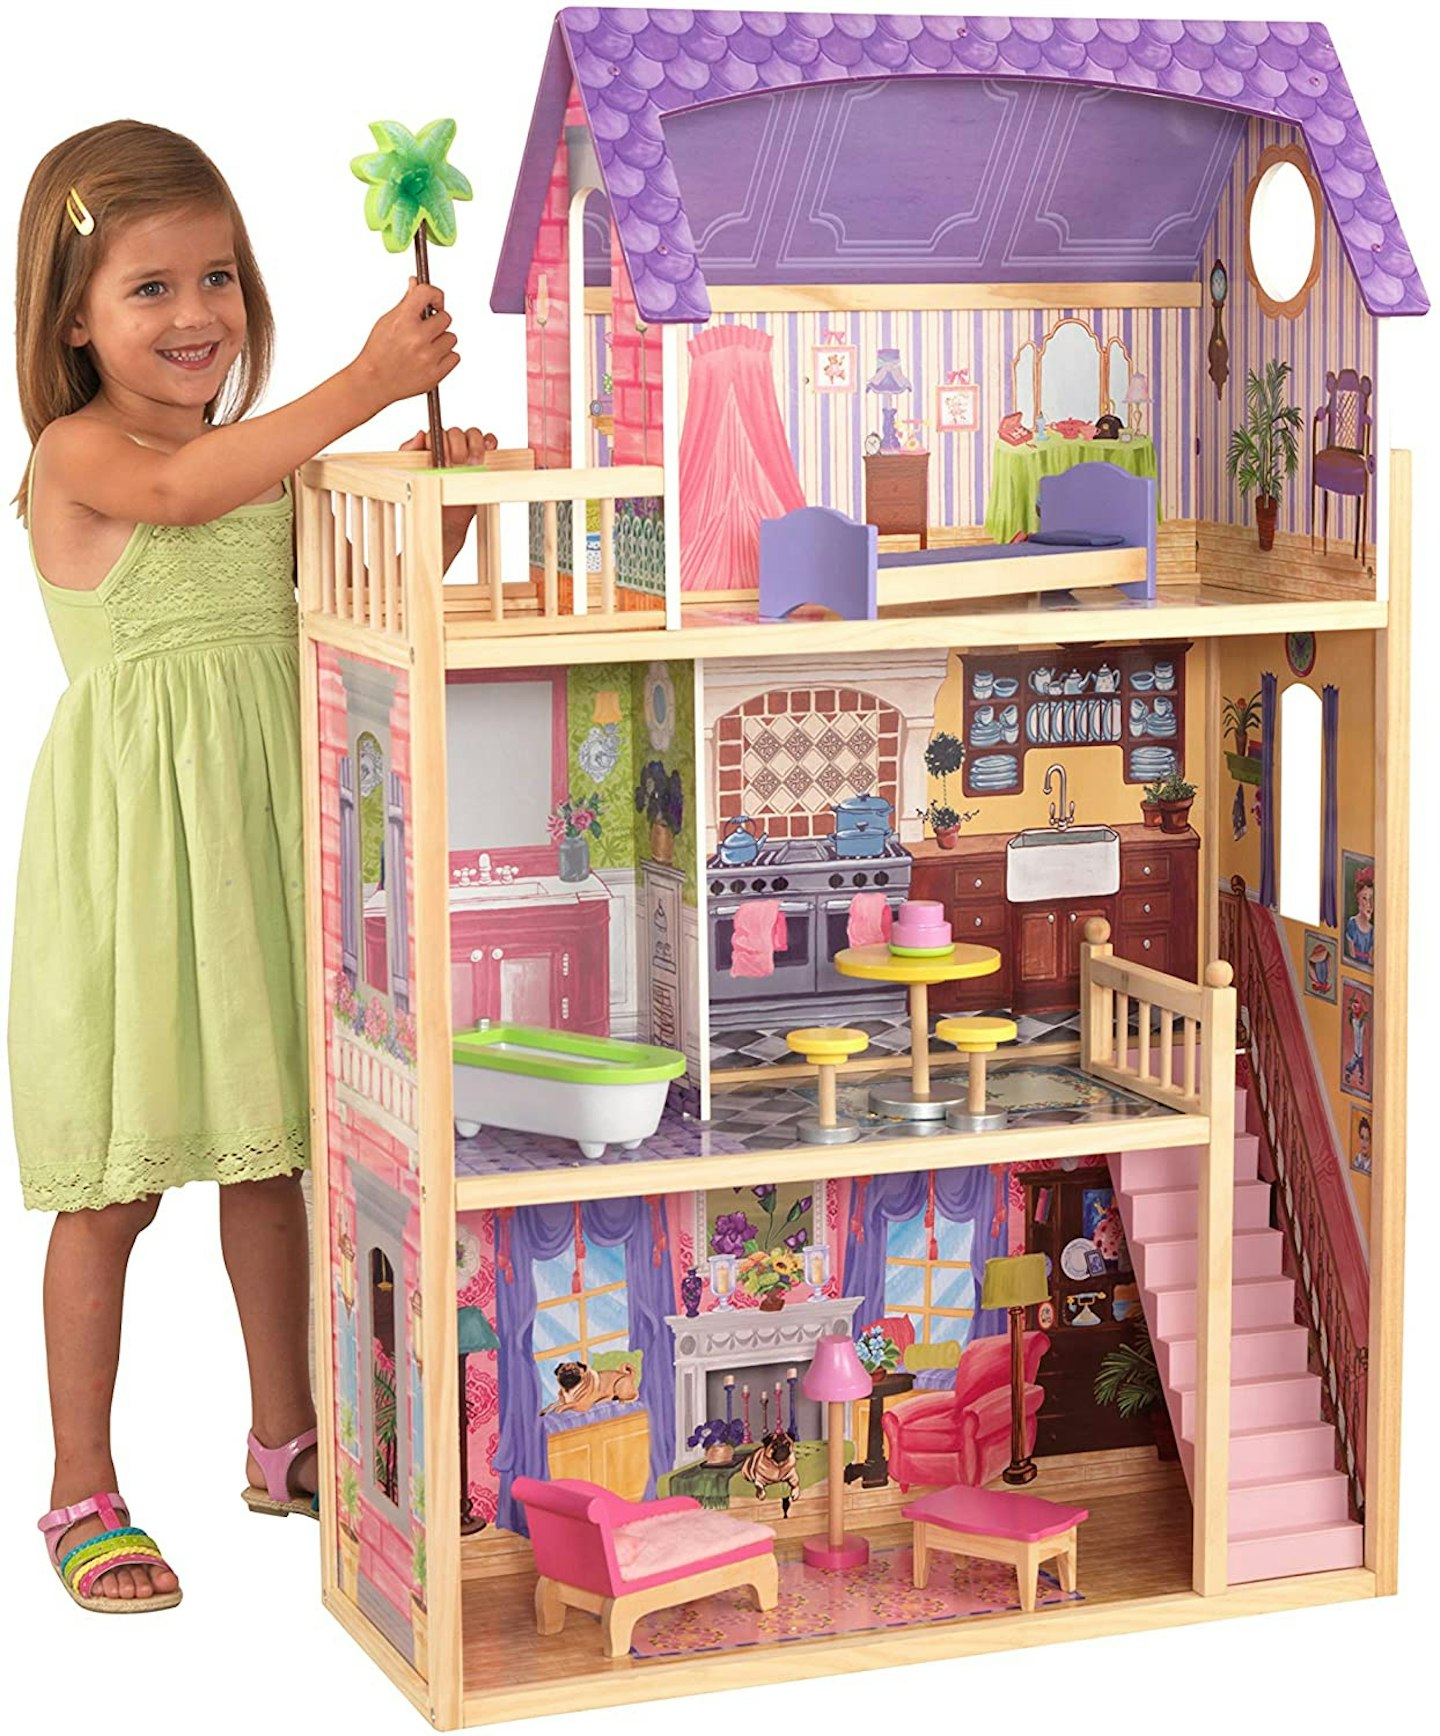 KidKraft 65092 Kayla Wooden Dolls House with Furniture and Accessories Included